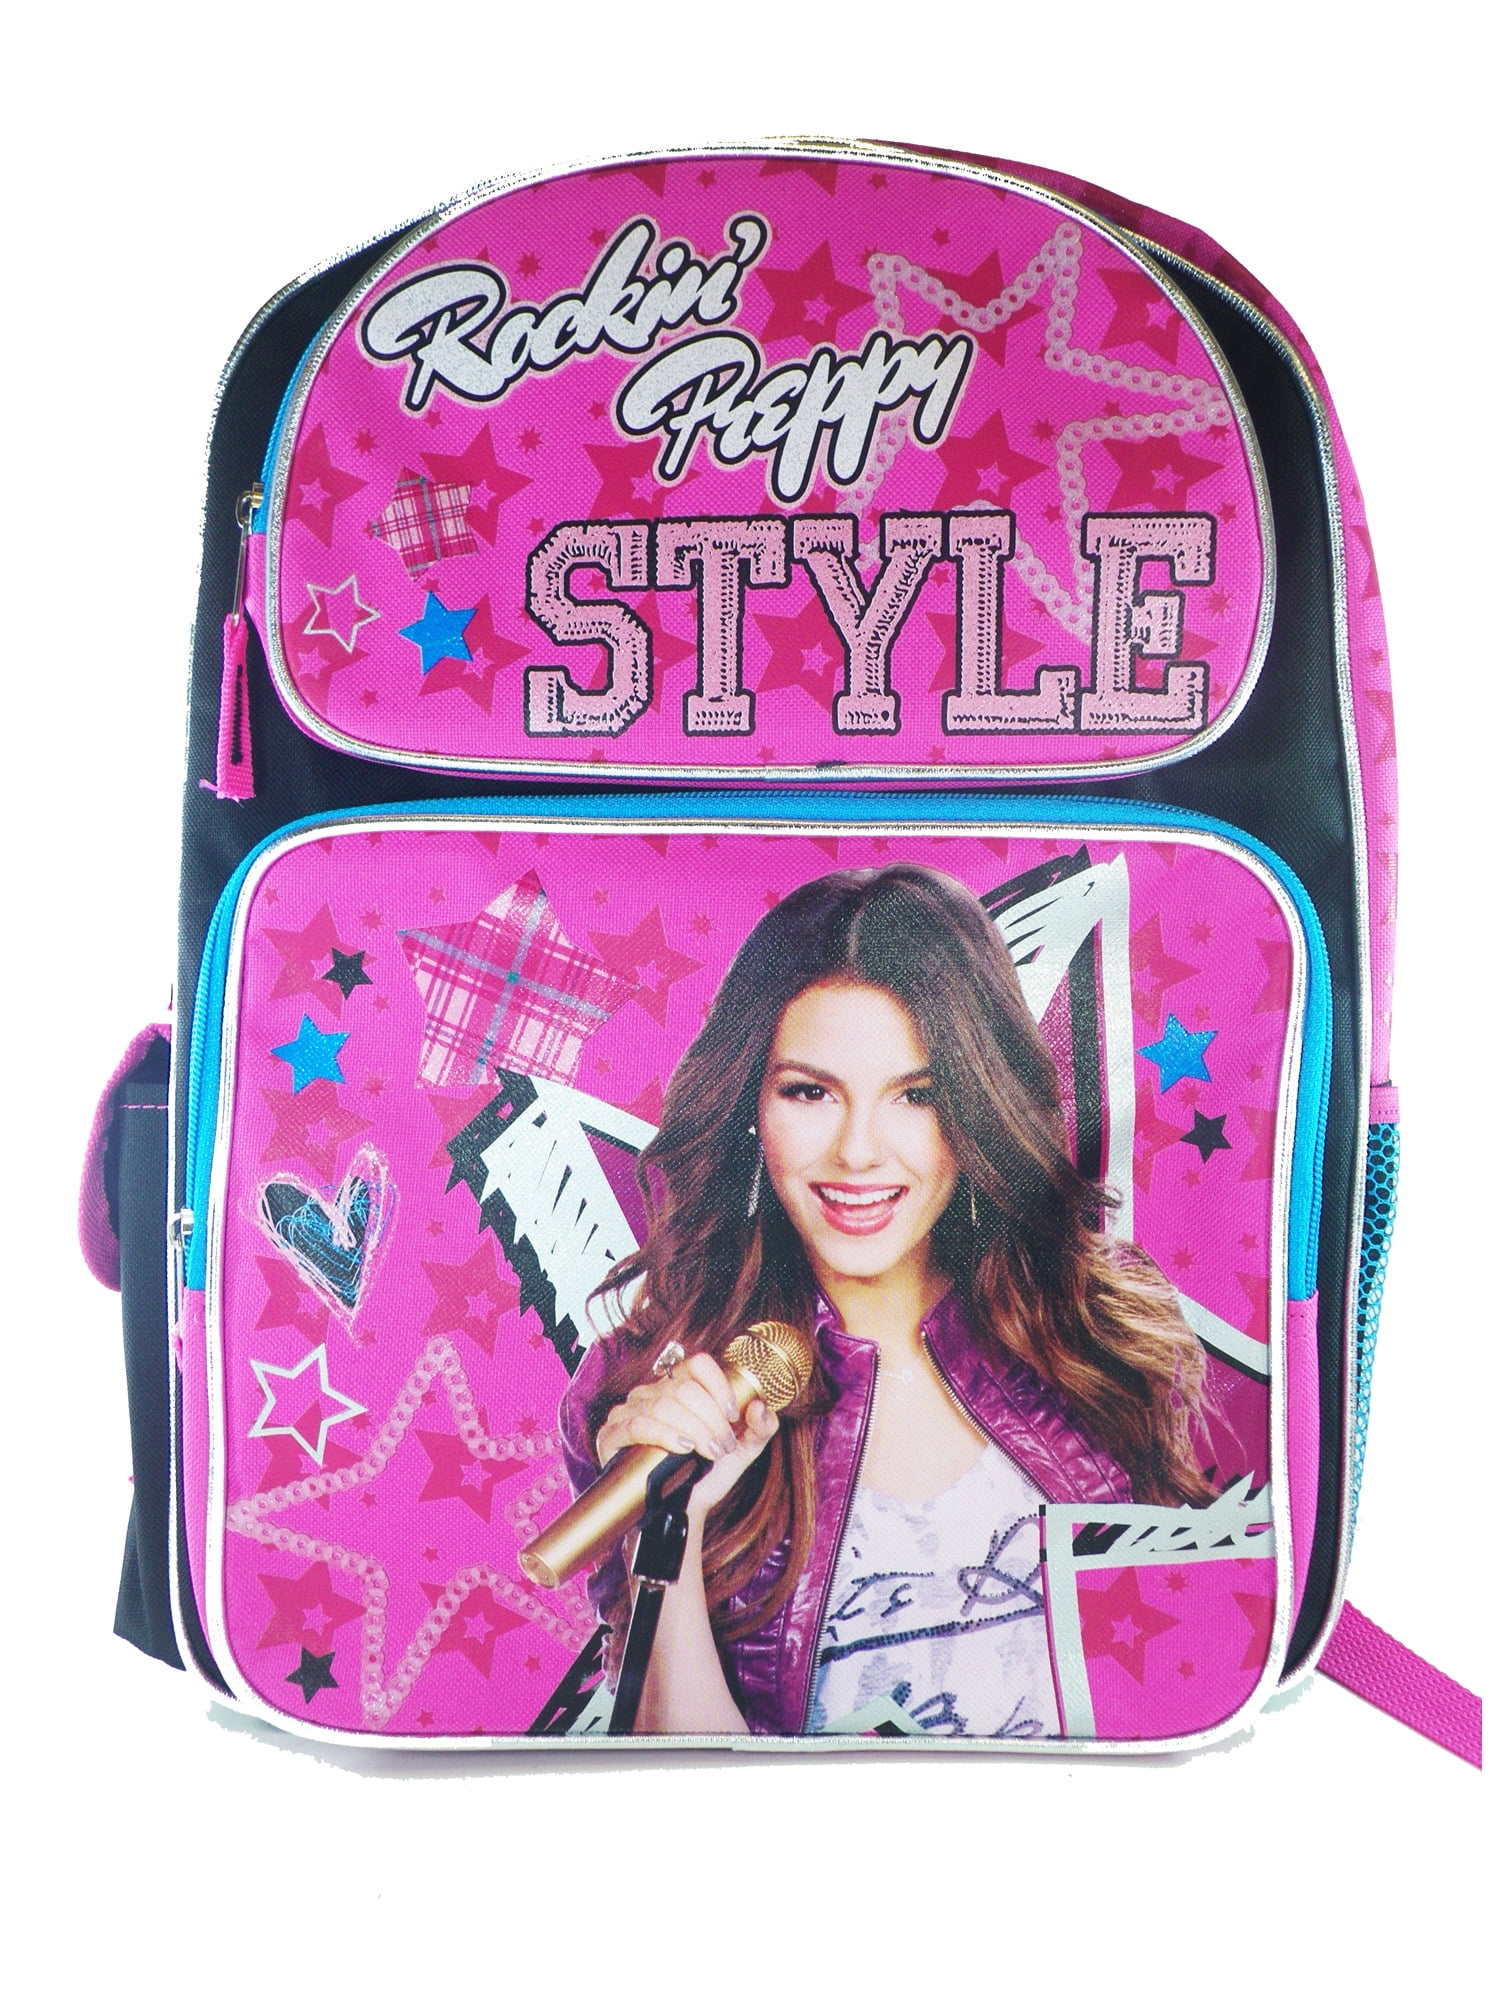 Victorious Victoria Justice Backpack - Rockin 16